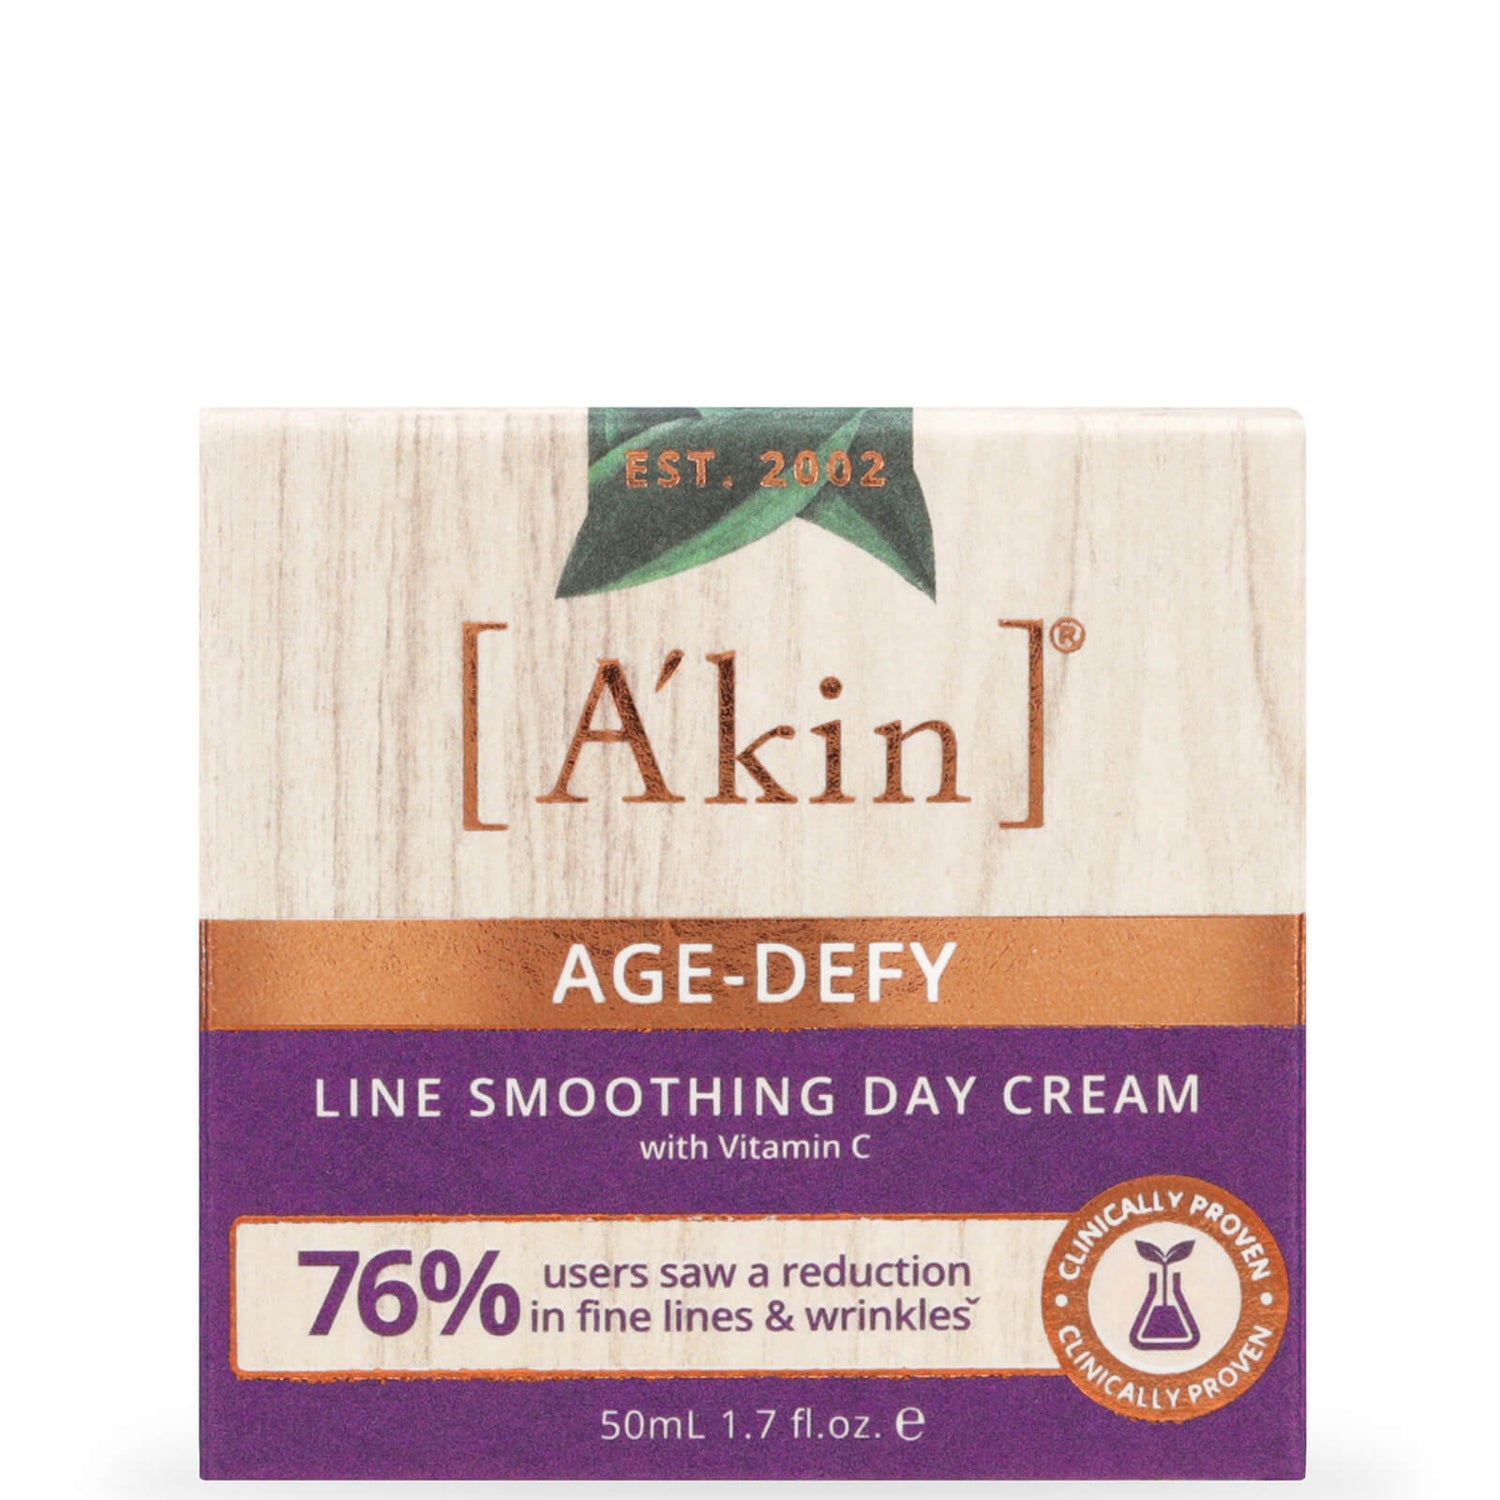 A'kin Age-Defy Line Smoothing Day Cream 50ml